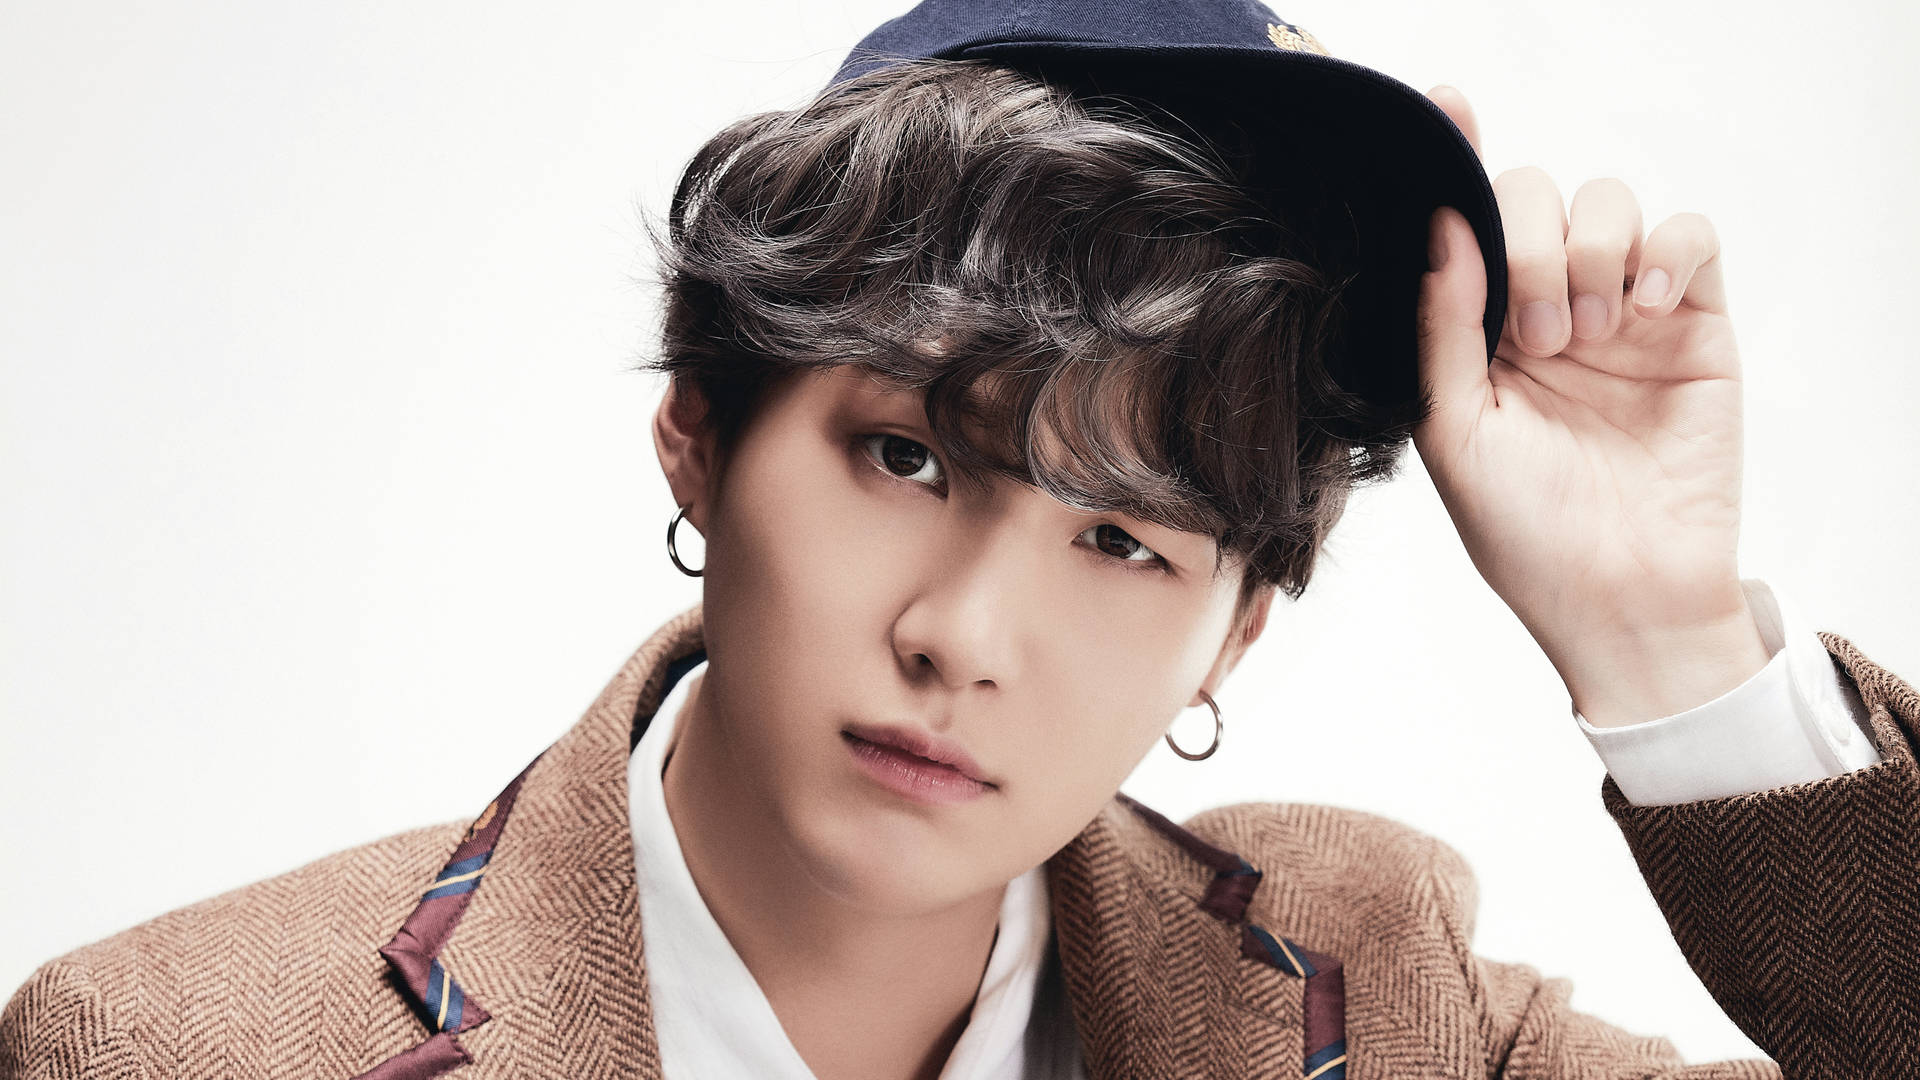 Suga 7680X4320 Wallpaper and Background Image